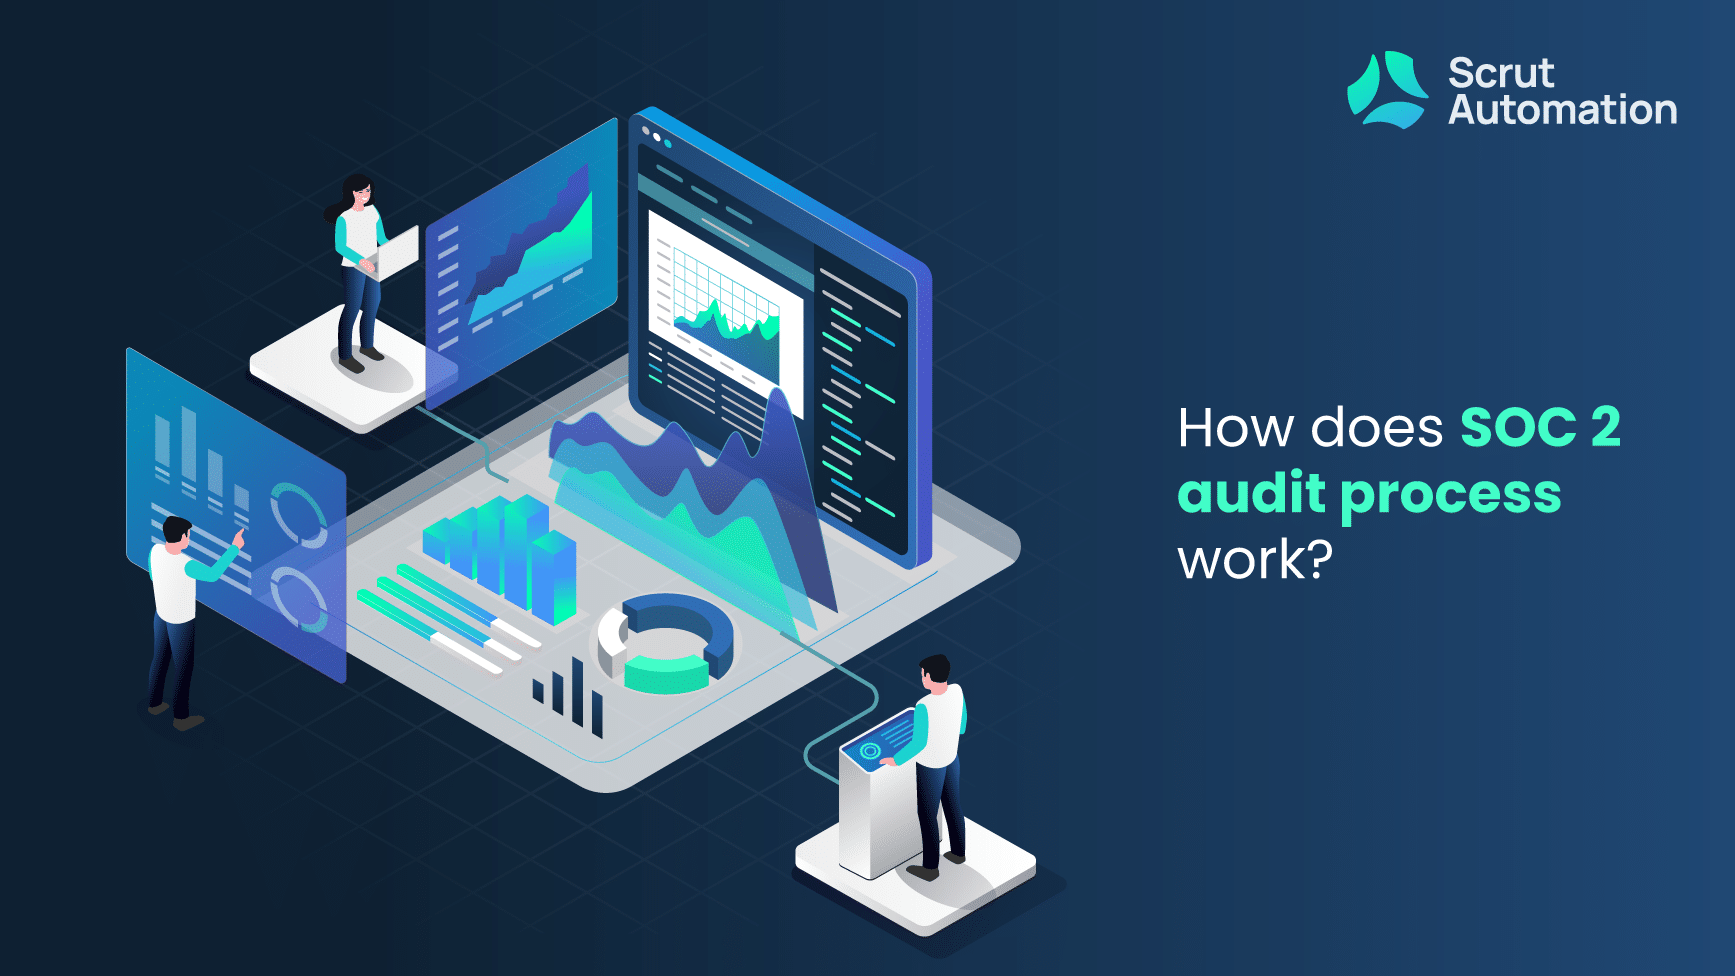 SOC 2 Audit Process How Does It Work?